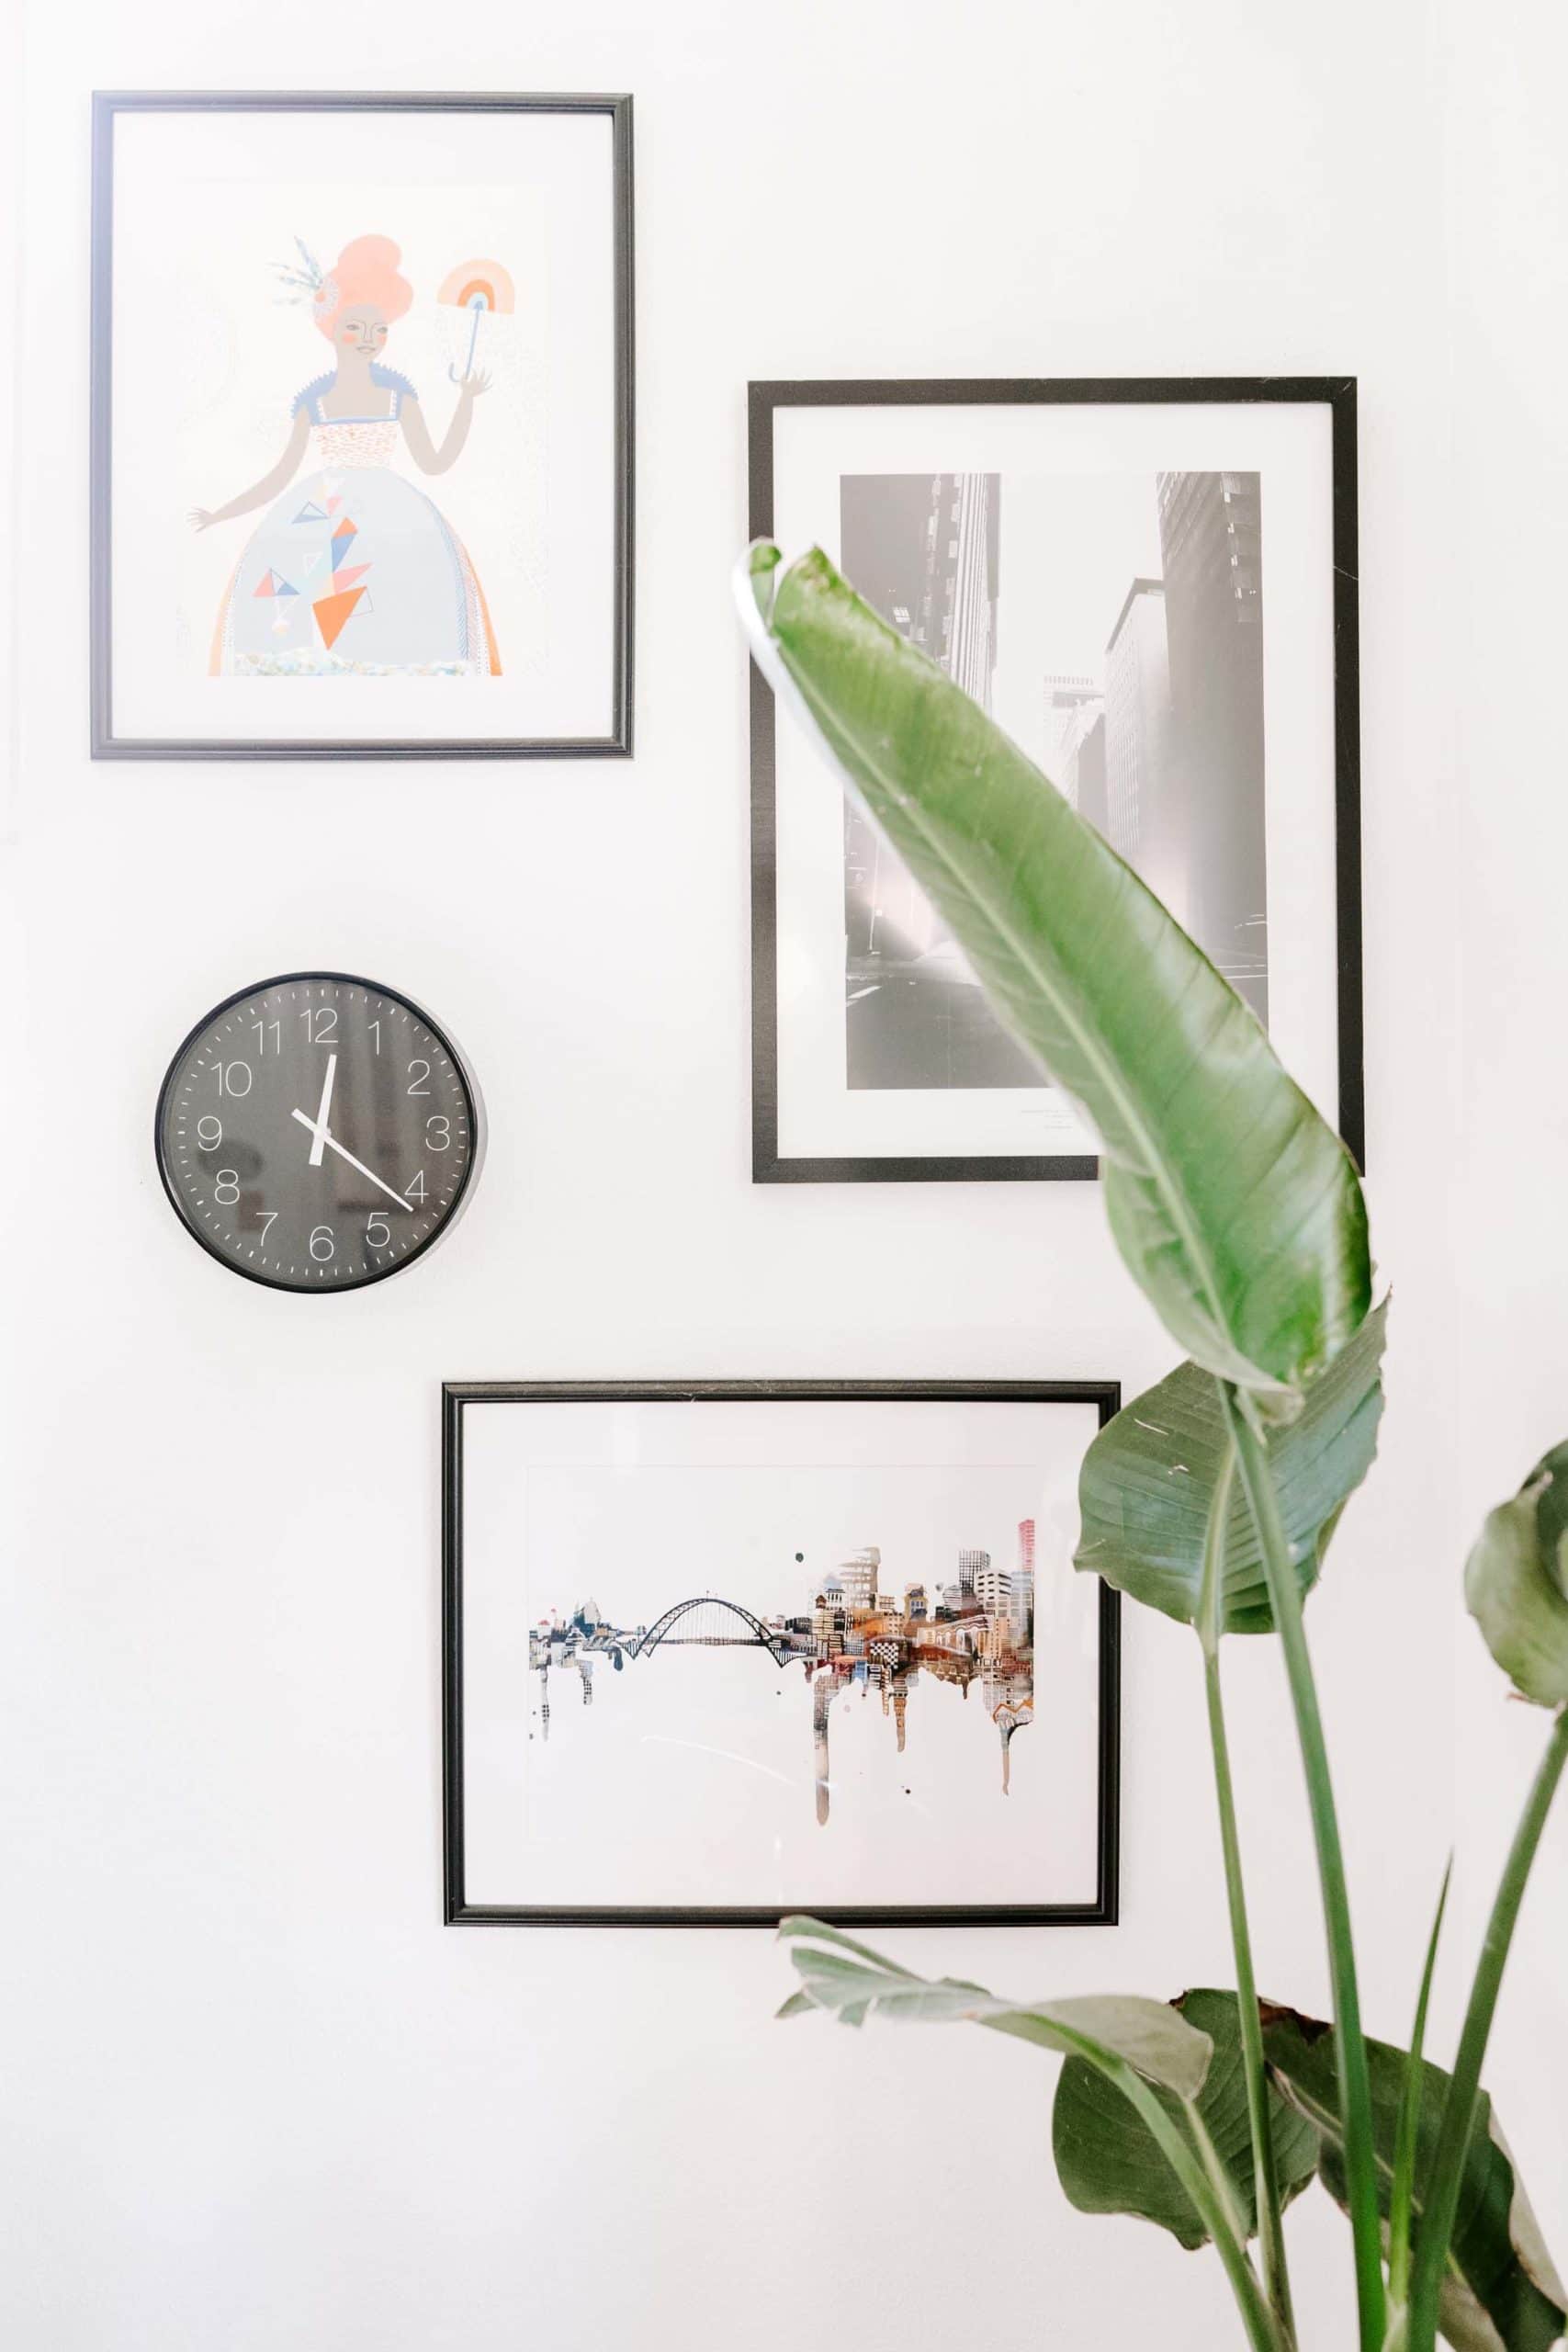 Where to find beautiful art for your home without it costing a fortune